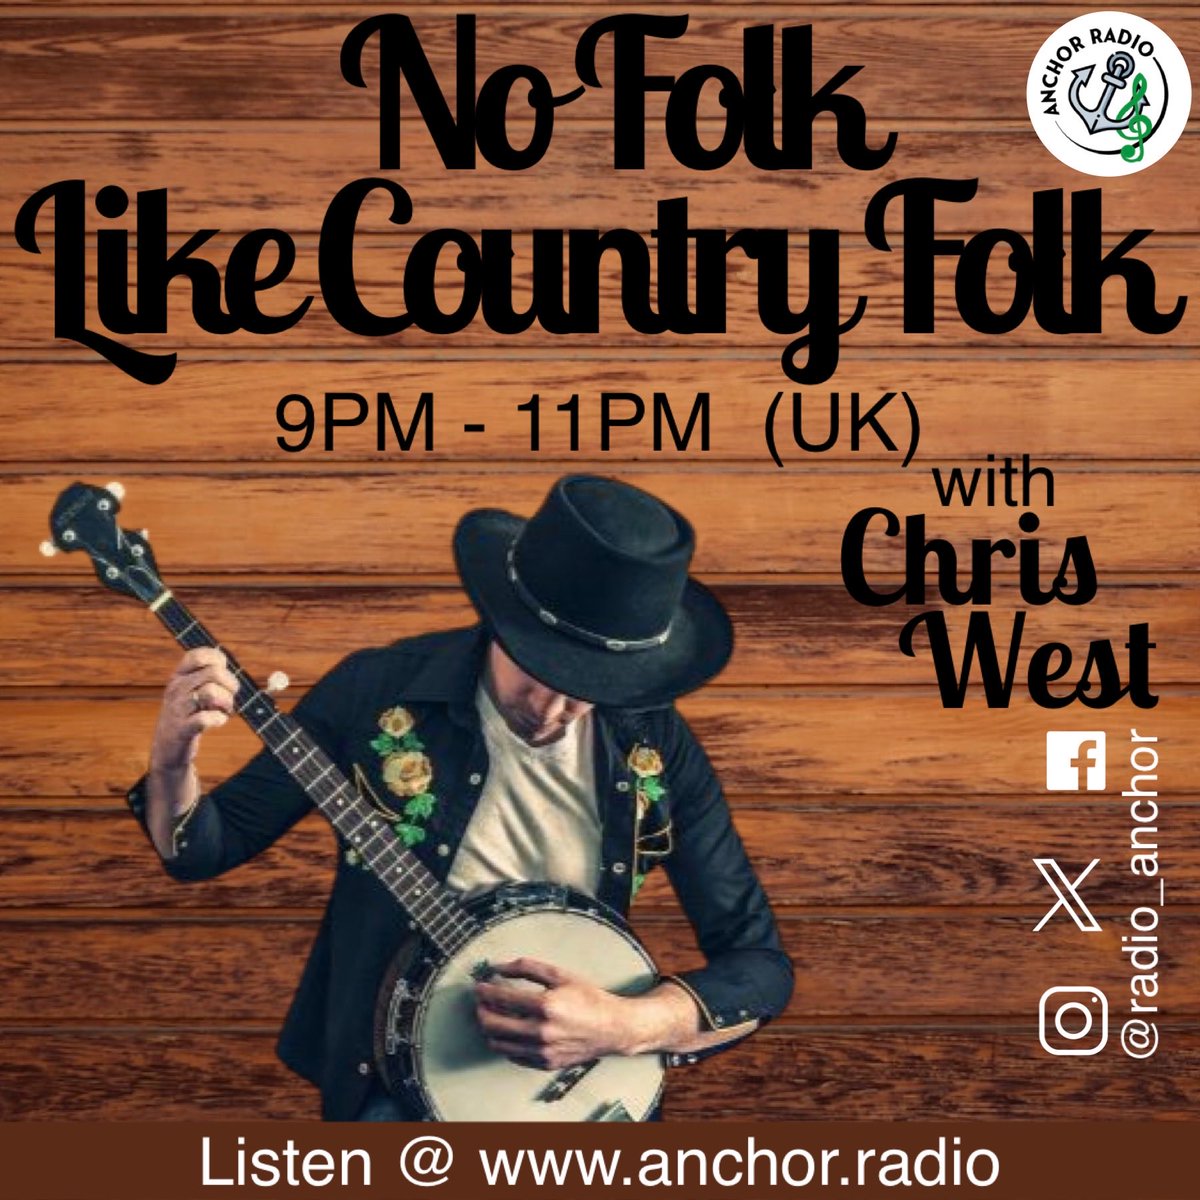 Wooooo! It’s my turn in the No Folk Like Country Folk chair at the top of the hour on @radio_anchor! Tune in for 2 hours of the best americana from your past and your future only on anchor.radio